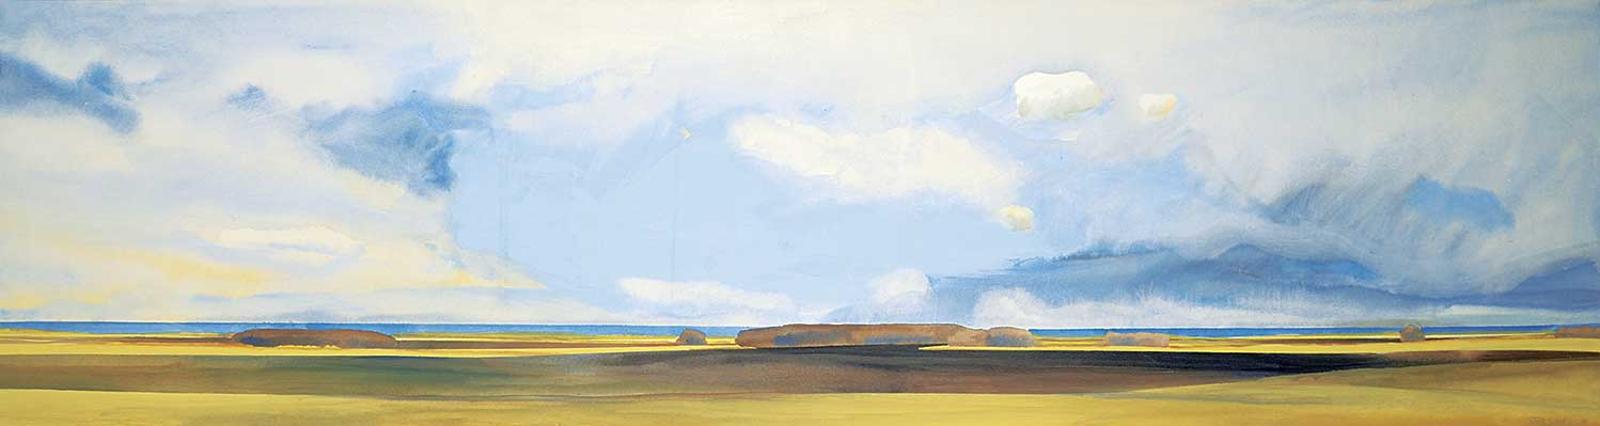 Jim Stokes (1959) - Clouds and Fields